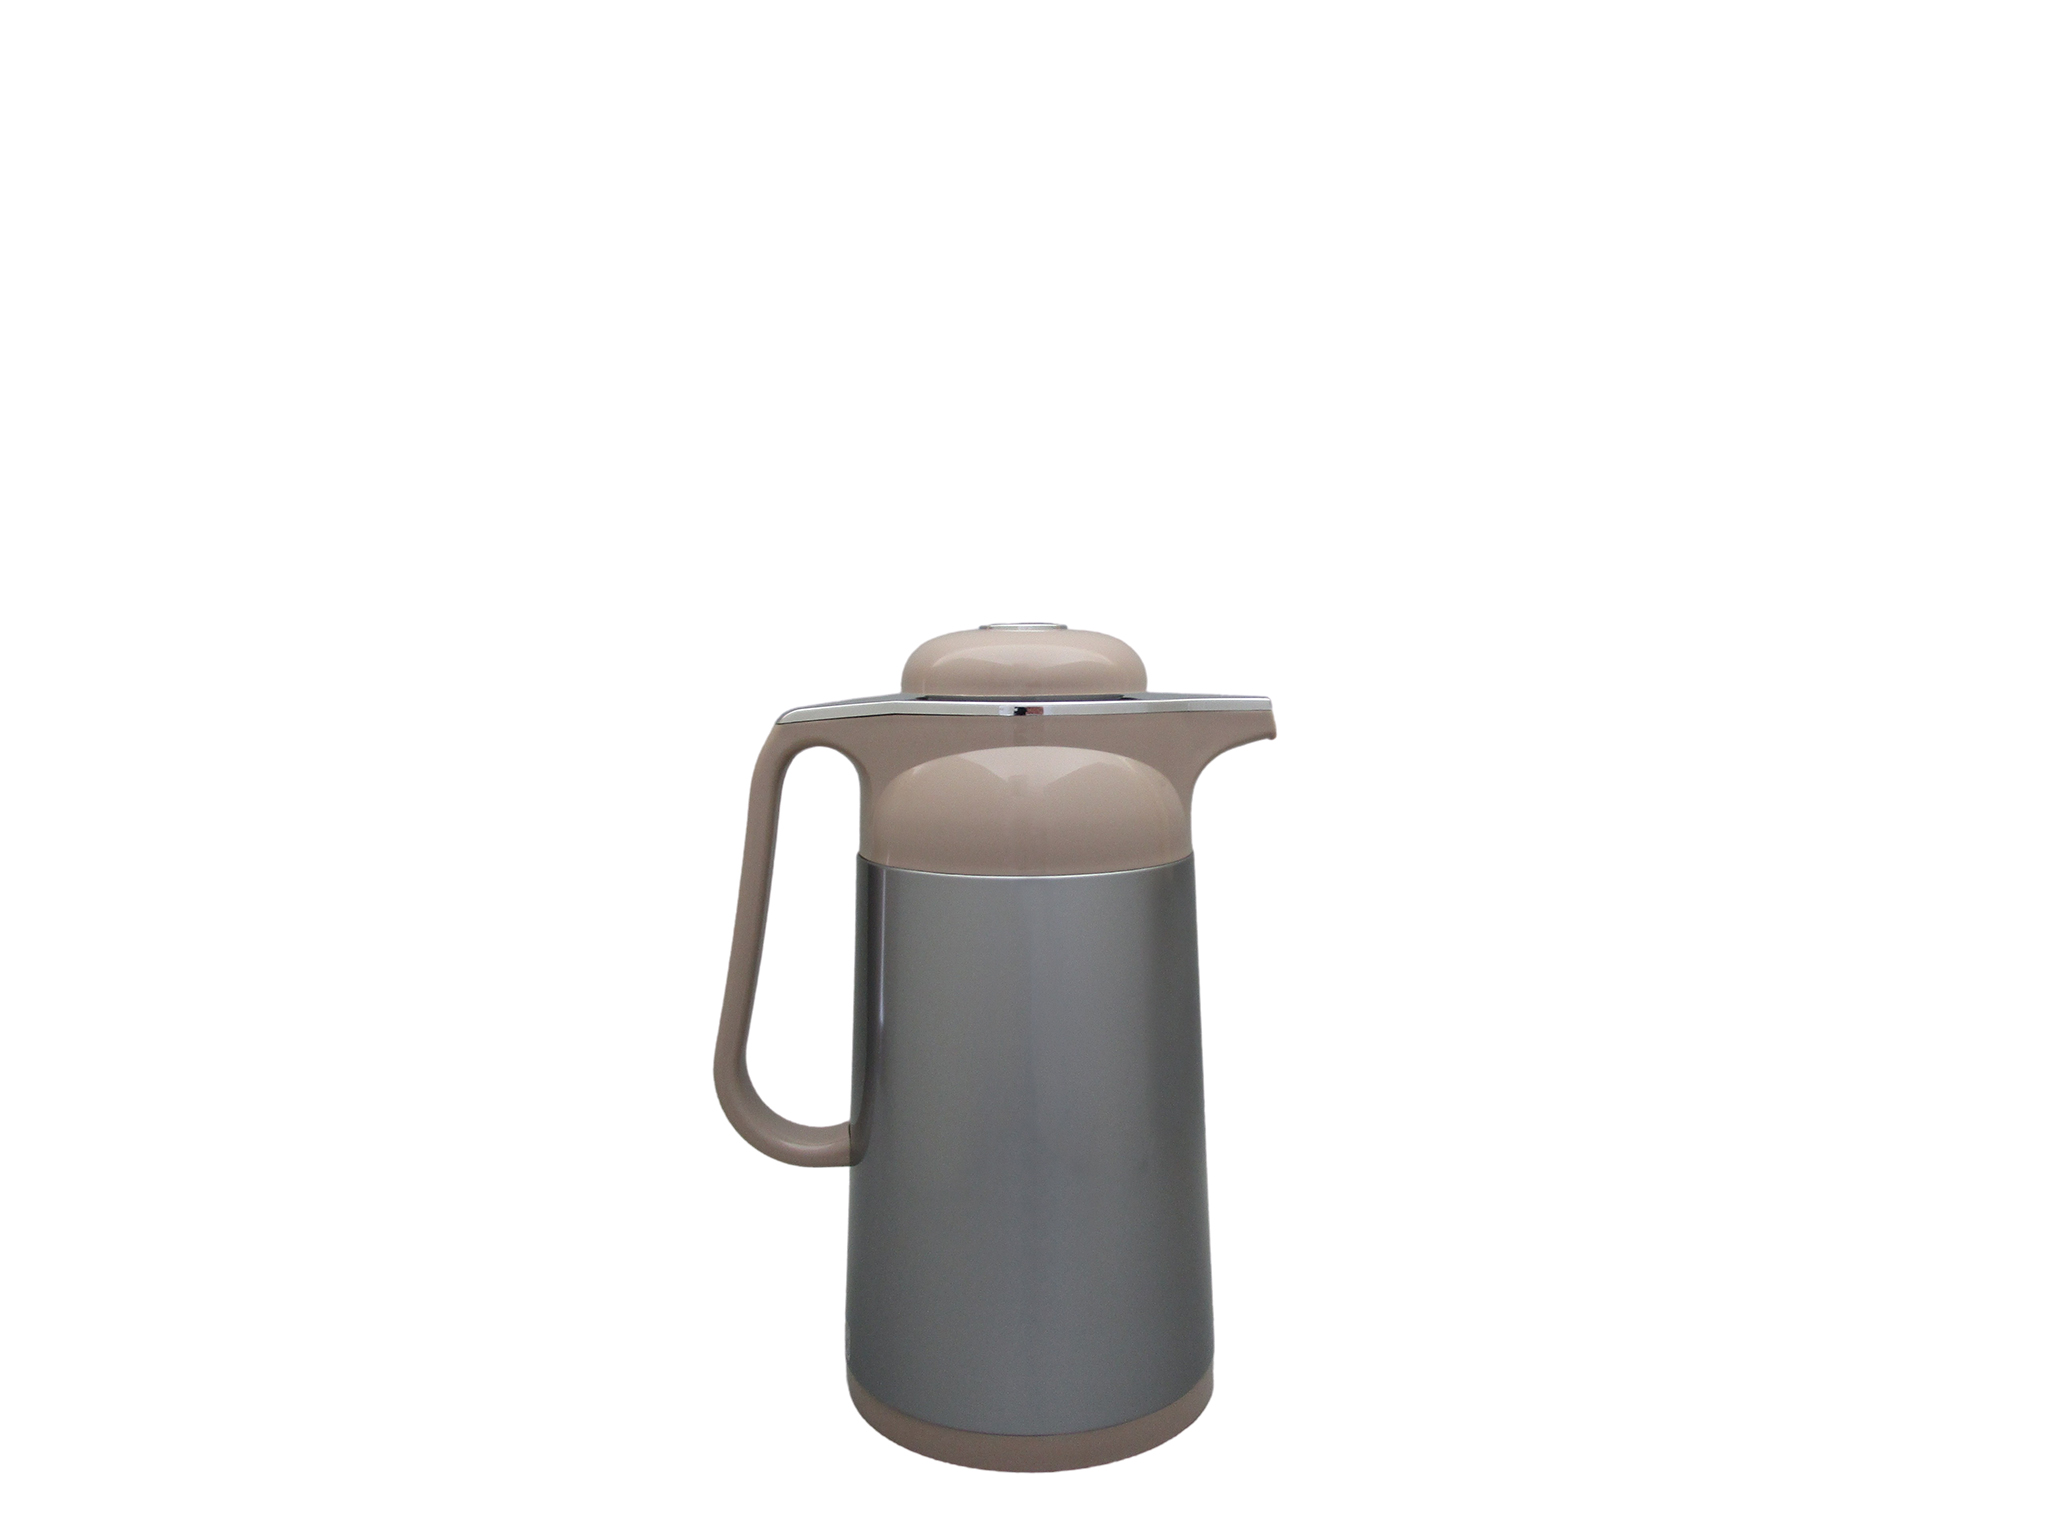 WAM10-040 - Pichet isotherme corps métal taupe 1.0 L - Isobel